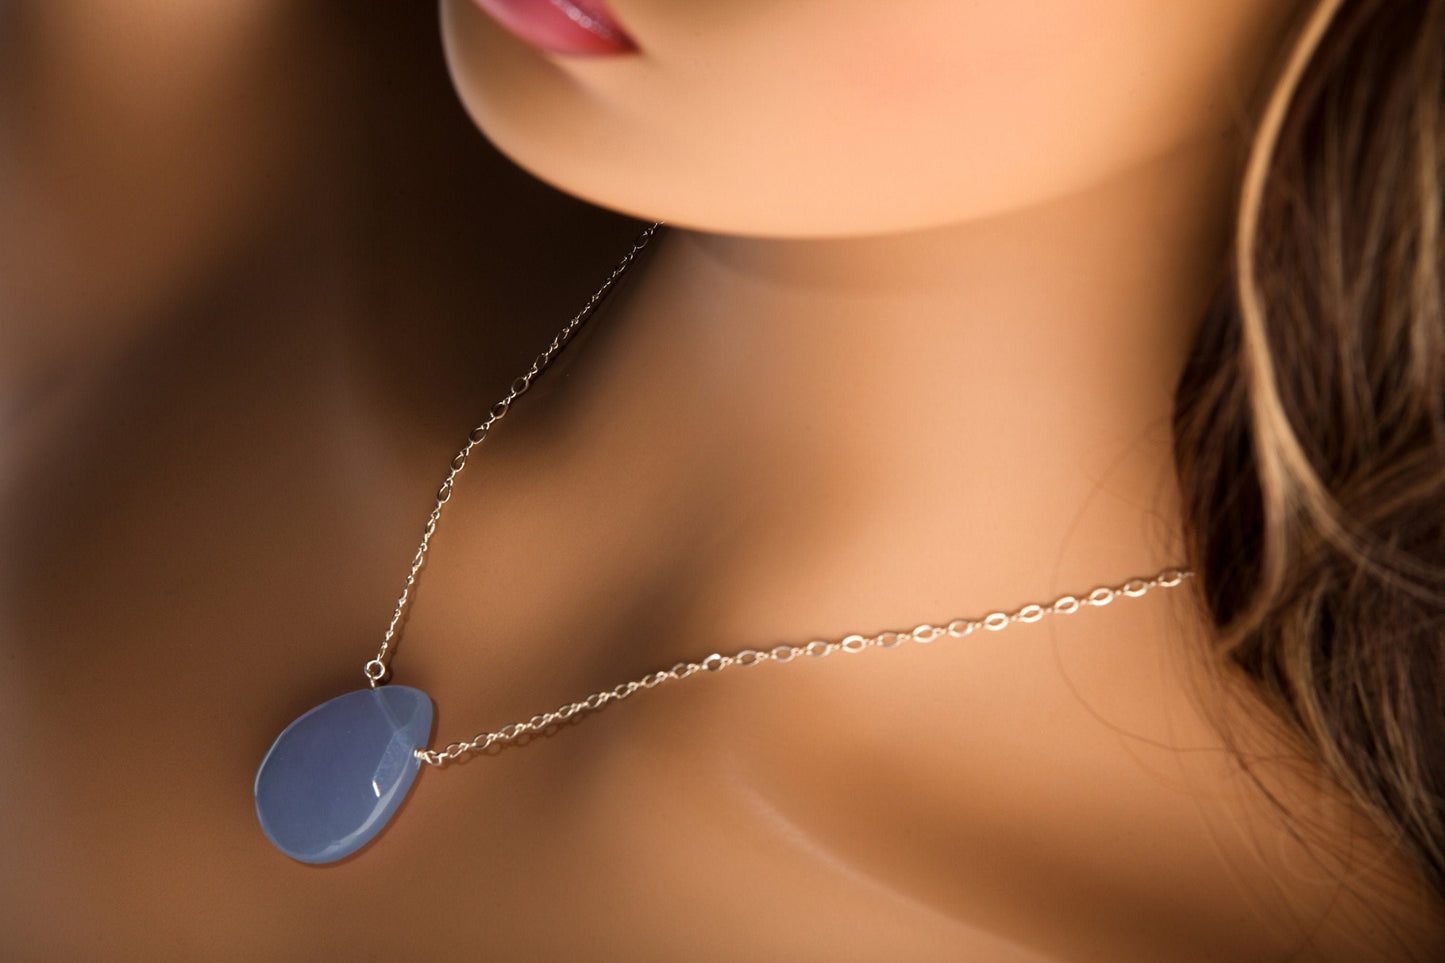 Chalcedony Faceted large Pear Drop 22x30mm, Natural Gemstones in 925 Sterling Silver Chain or 14K Gold Filled Chain